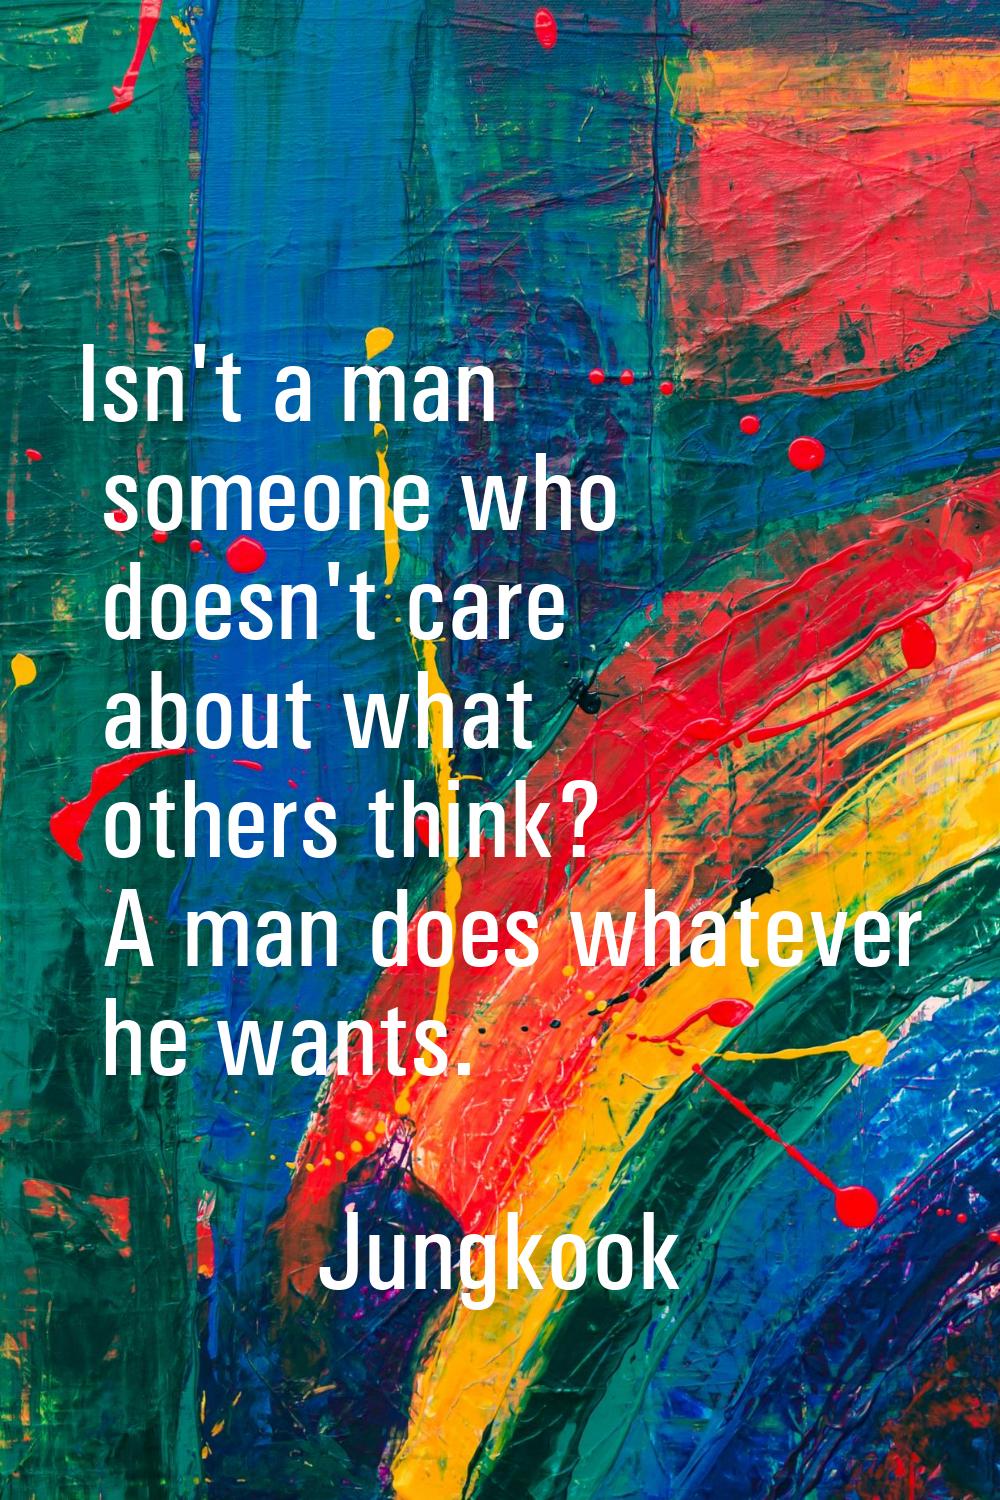 Isn't a man someone who doesn't care about what others think? A man does whatever he wants.